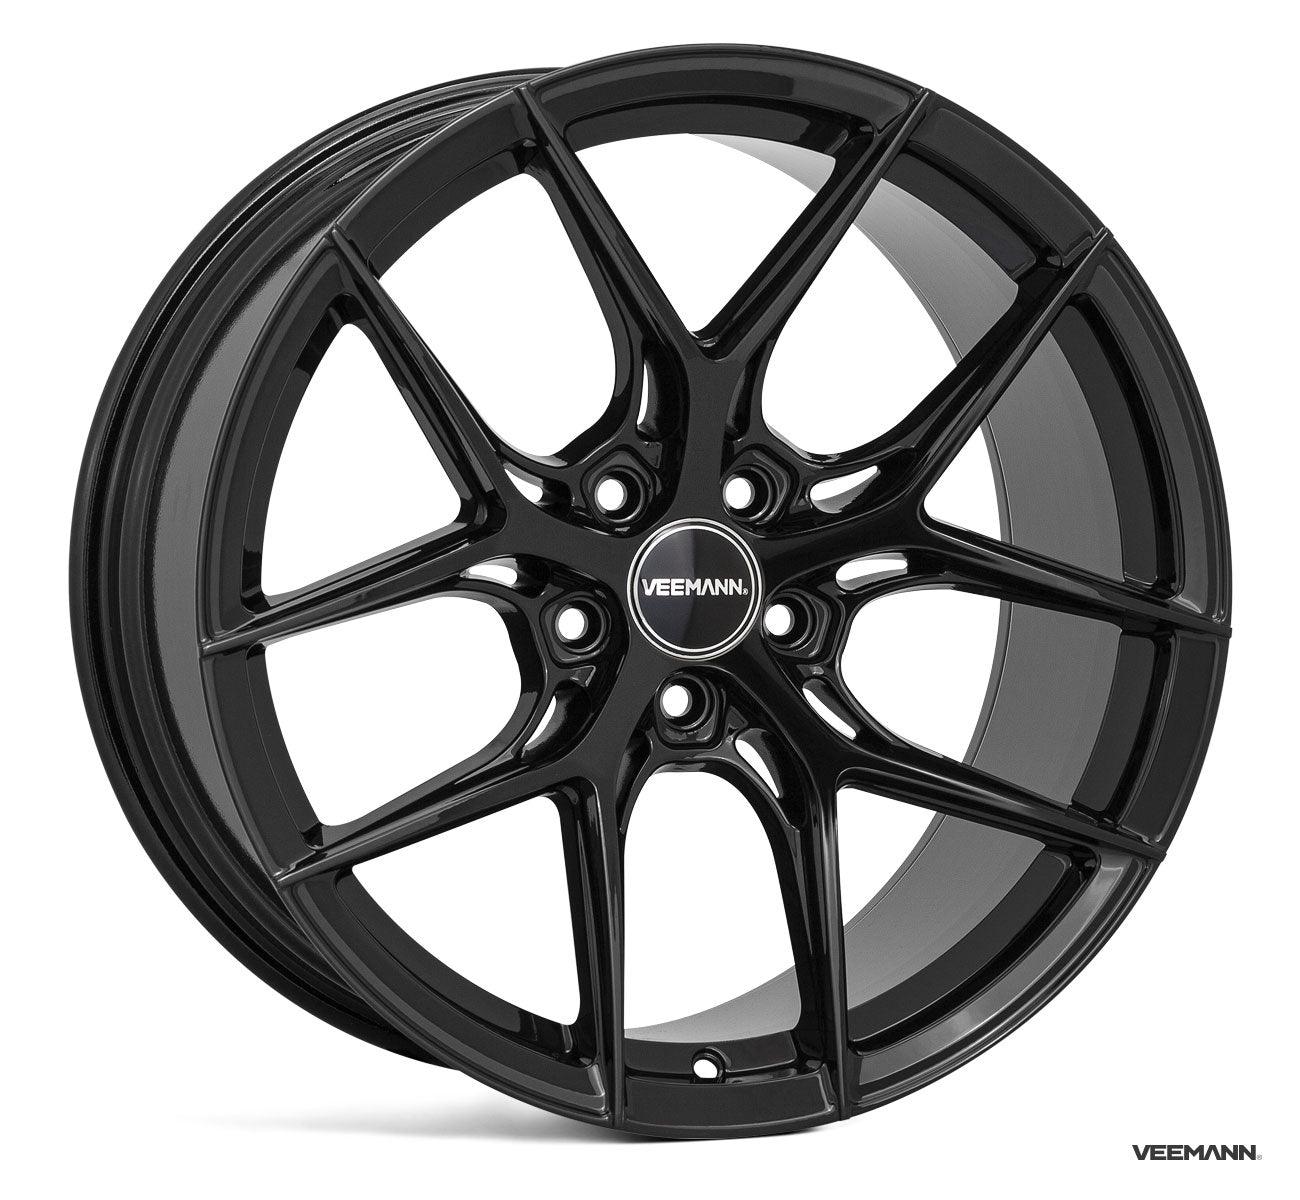 VEEMAN VC580R 20 INCH ALLOY WHEELS - 5X112 - GLOSS BLACK STAGGERED SET OF 4 - RisperStyling